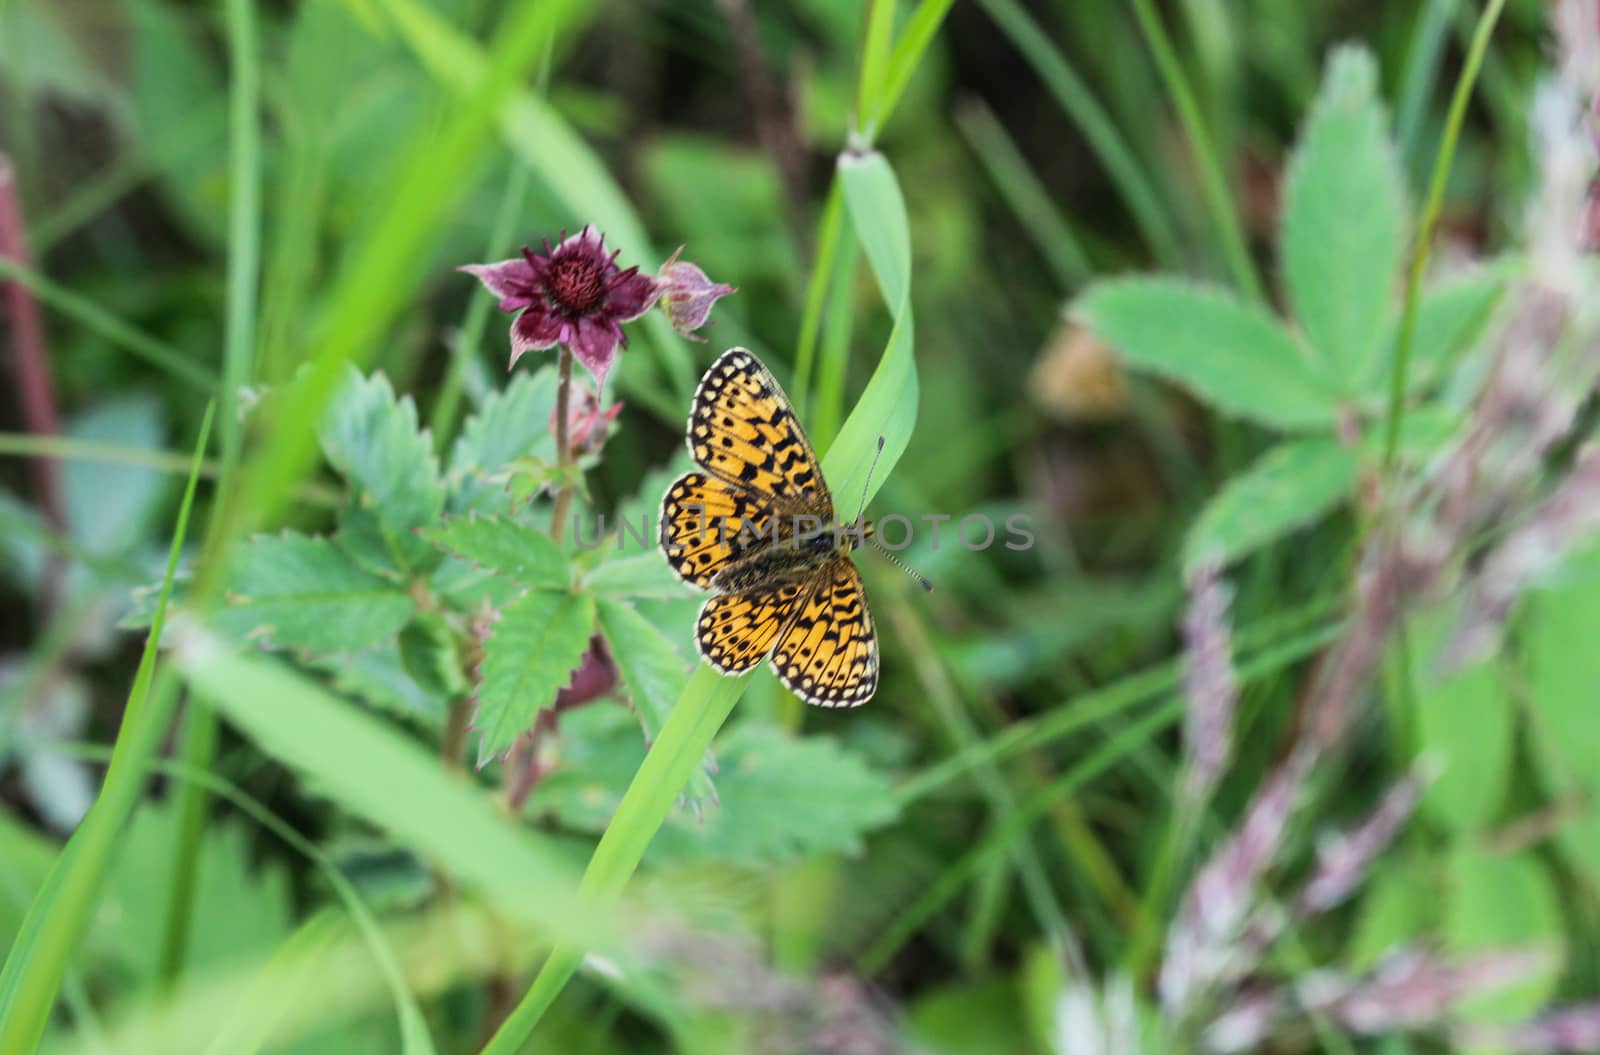 Boloria eunomia, the bog fritillary or ocellate bog fritillary butterfly of the family Nymphalidae by michaelmeijer